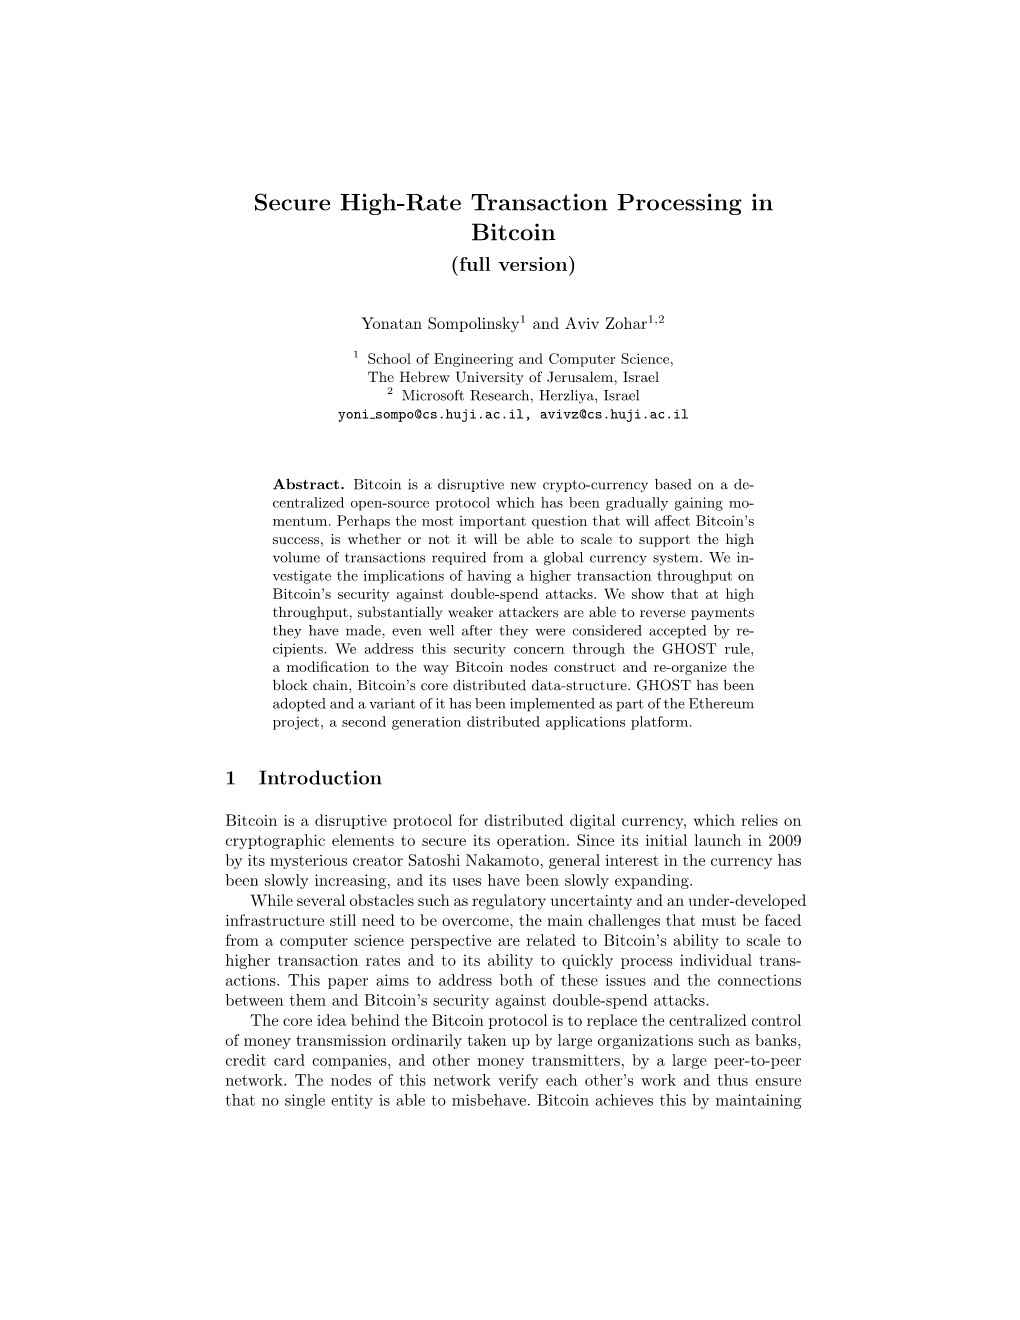 Secure High-Rate Transaction Processing in Bitcoin (Full Version)